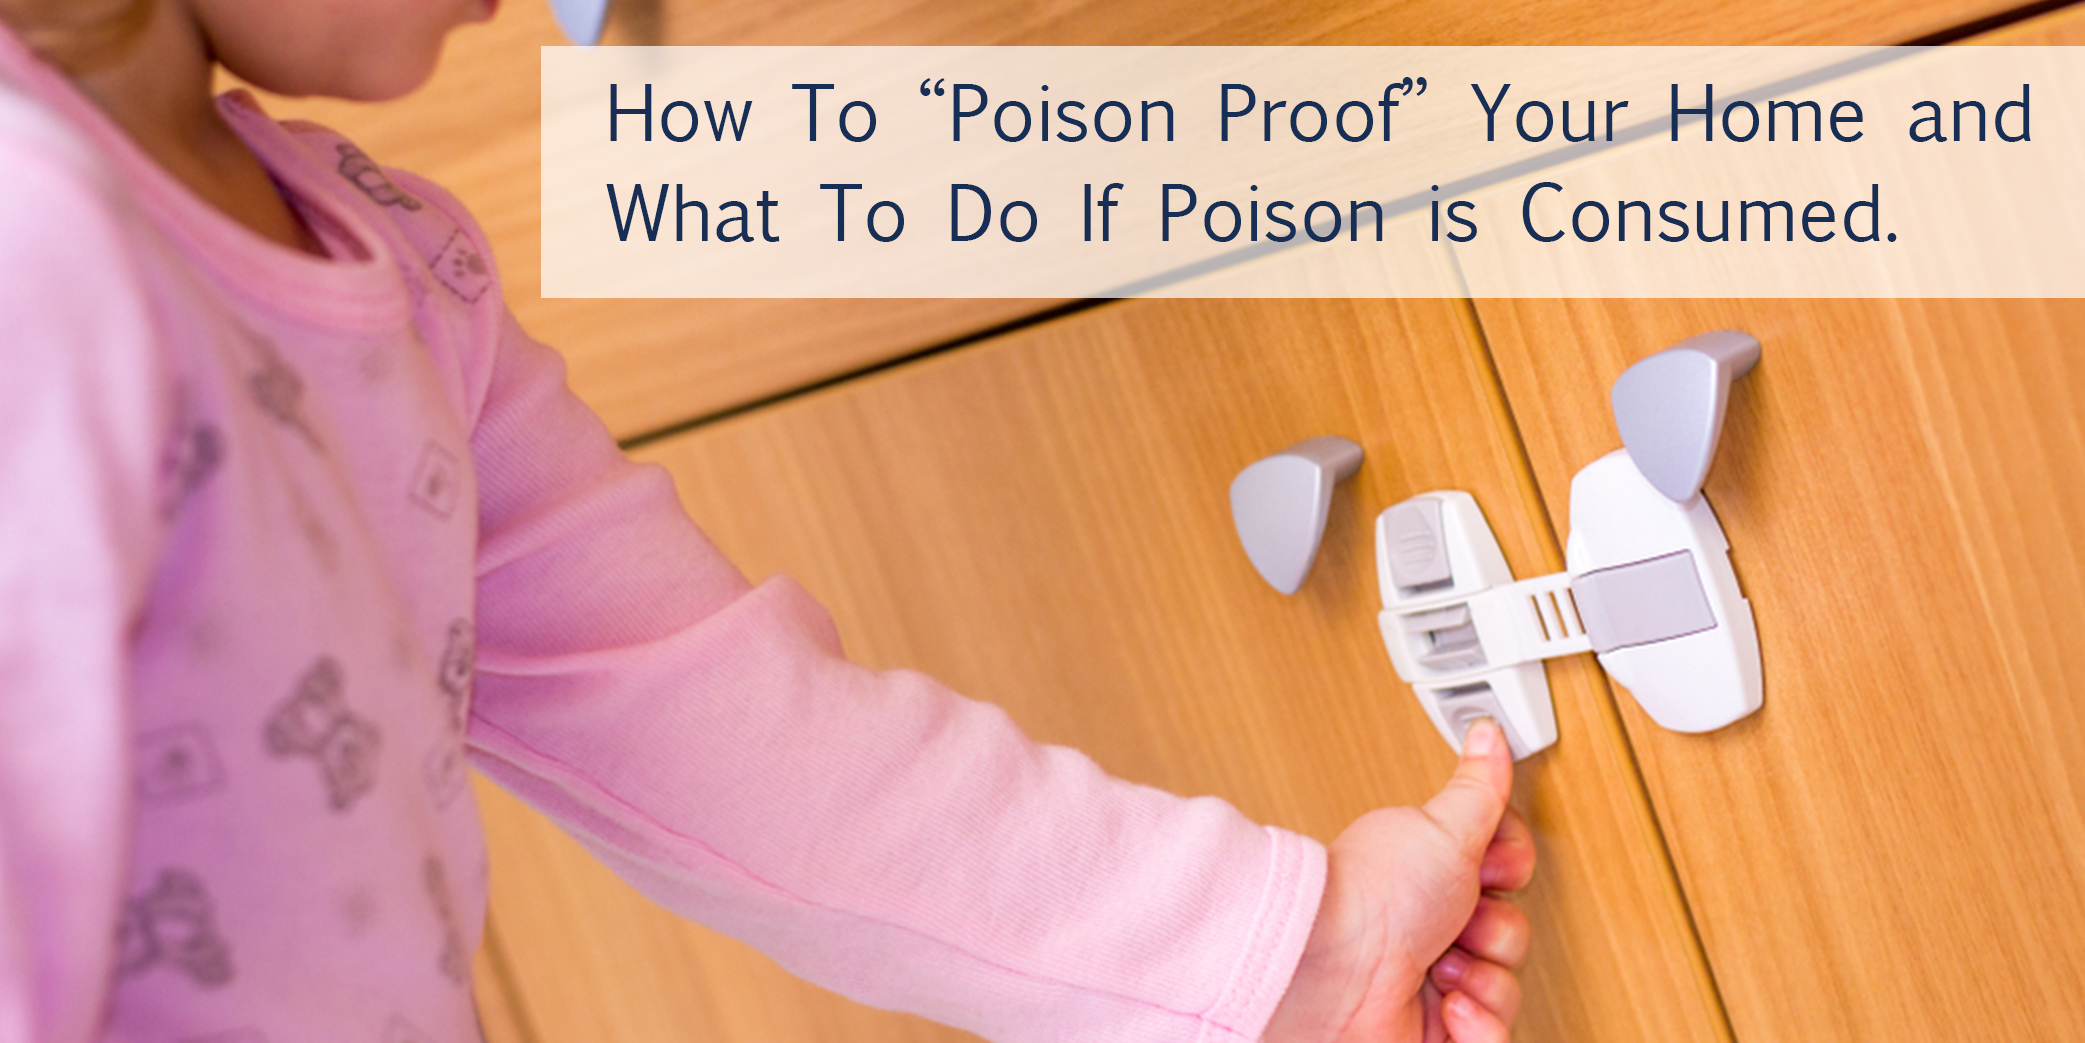 How to “poison proof” your home and what to do in an emergency